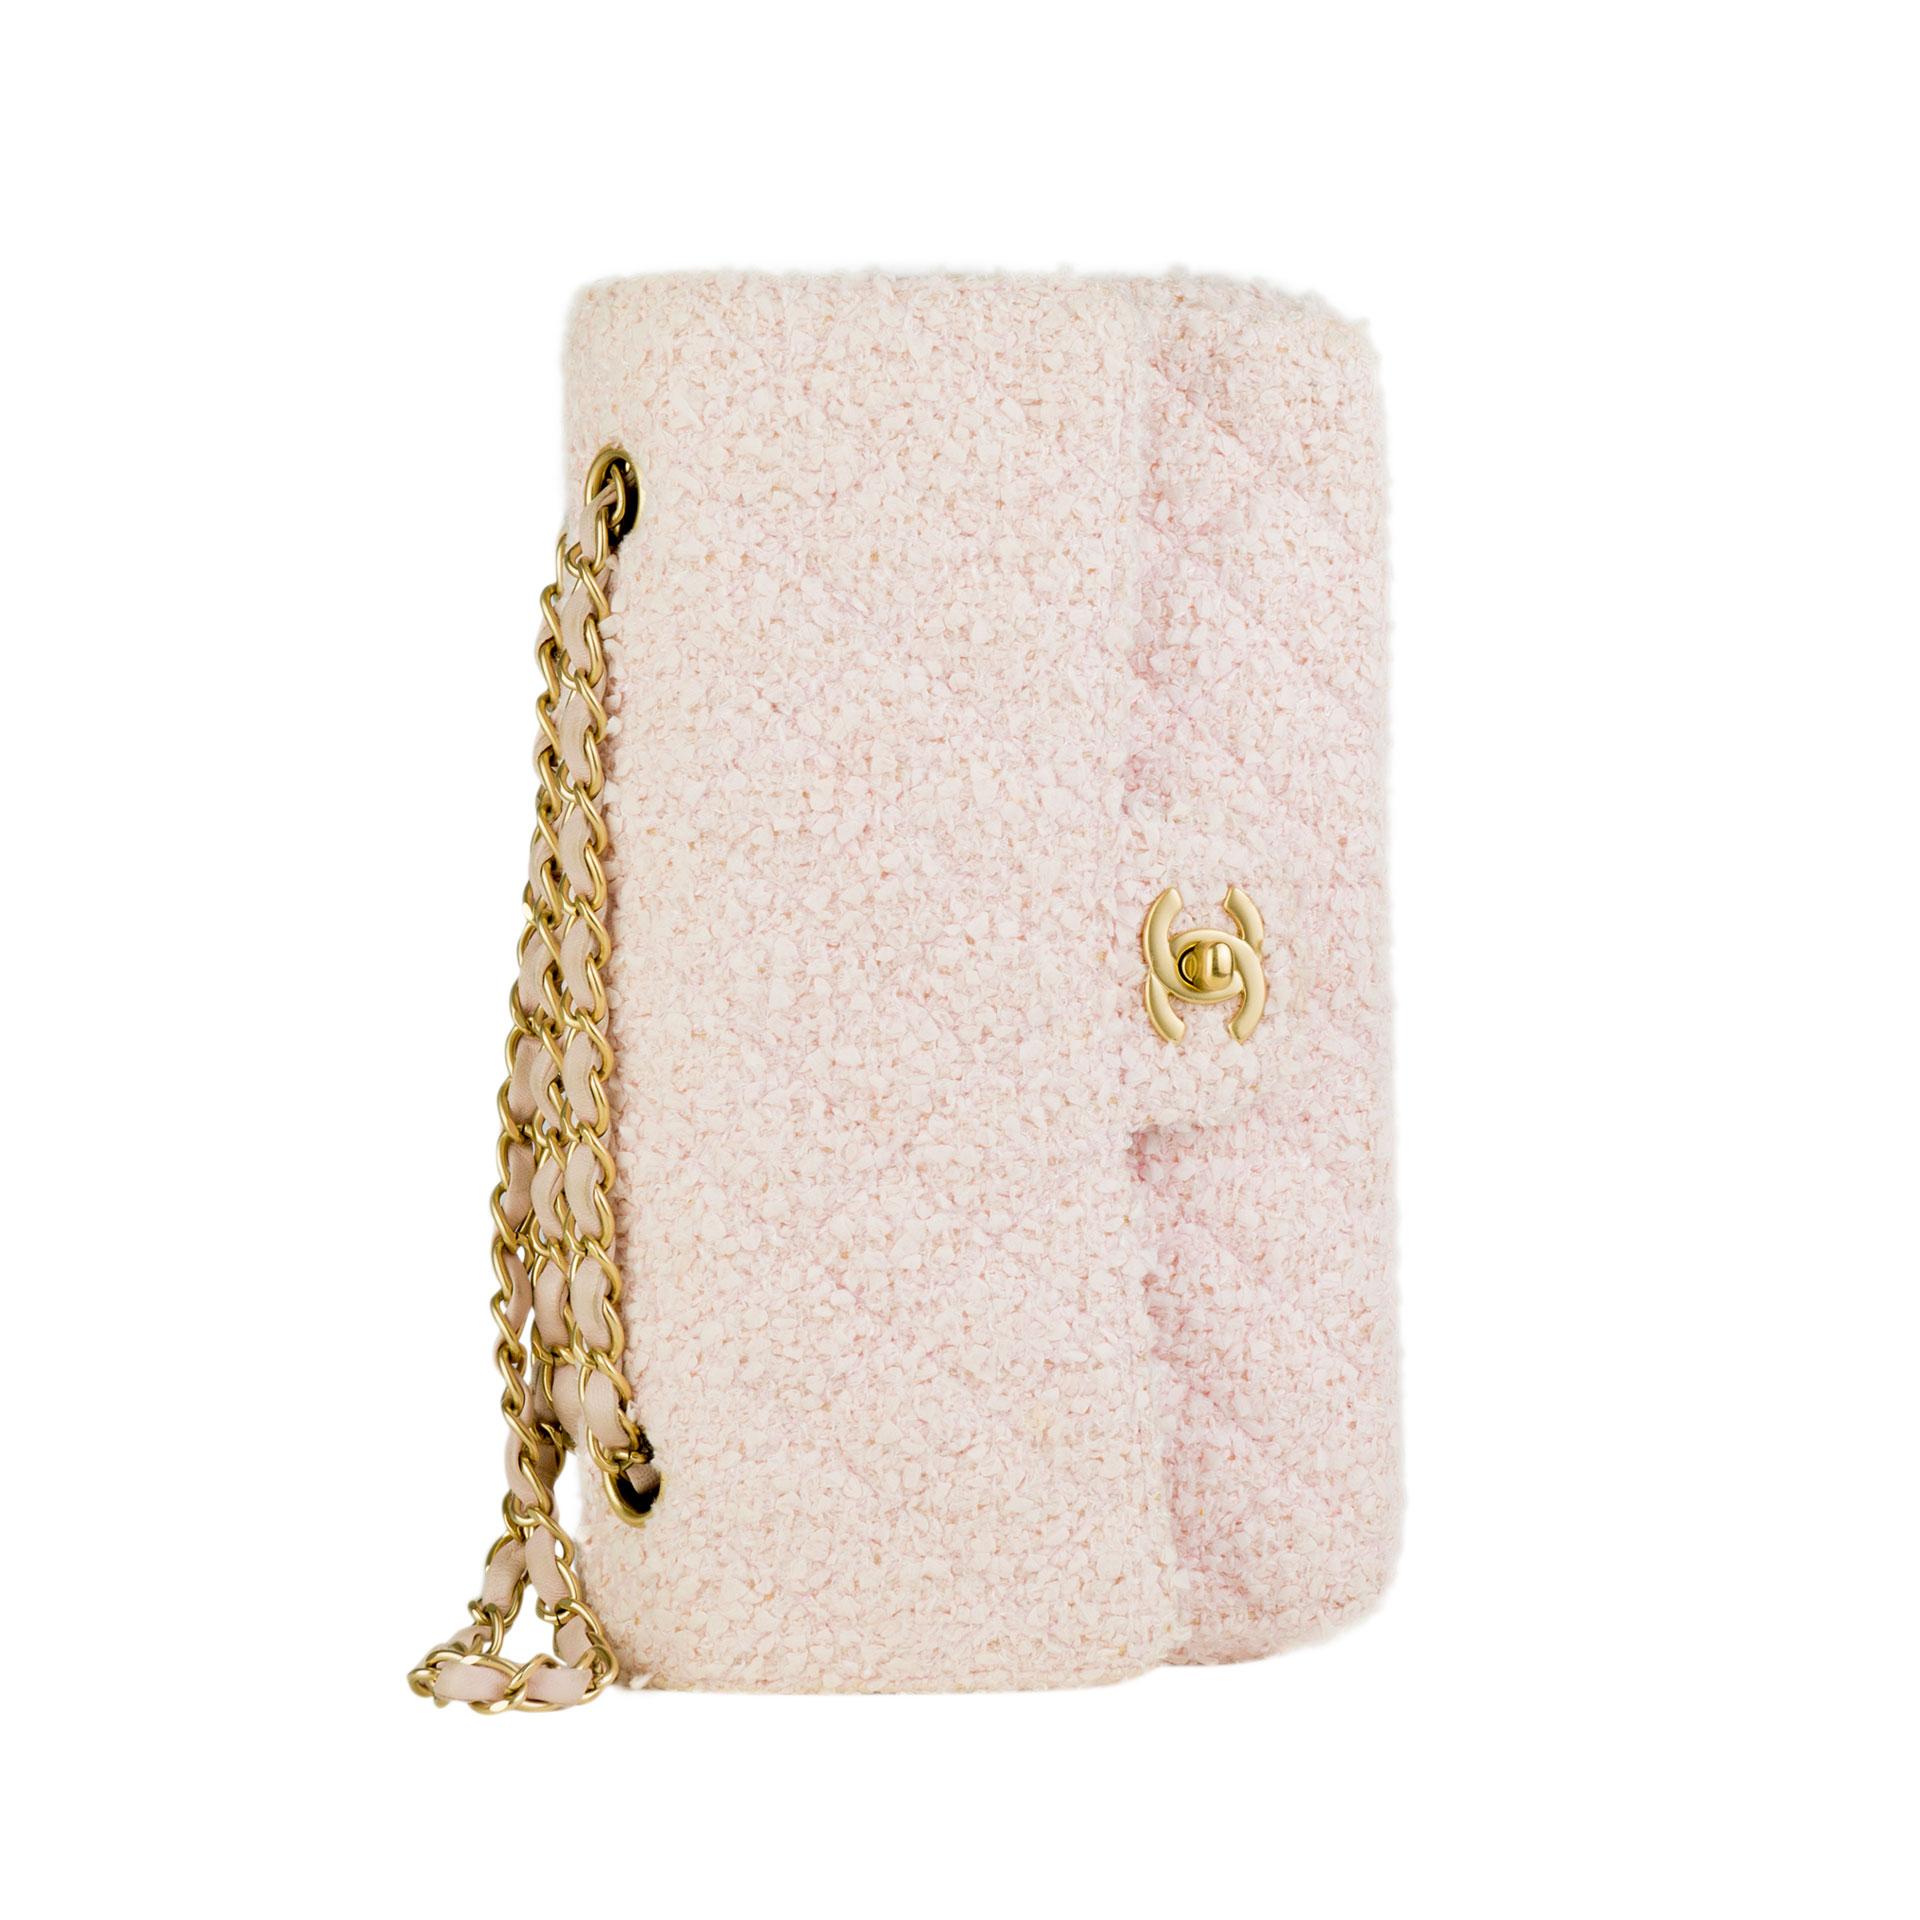 Women's Chanel Vintage Pink Tweed Medium Classic Soft Pink Flap Bag For Sale